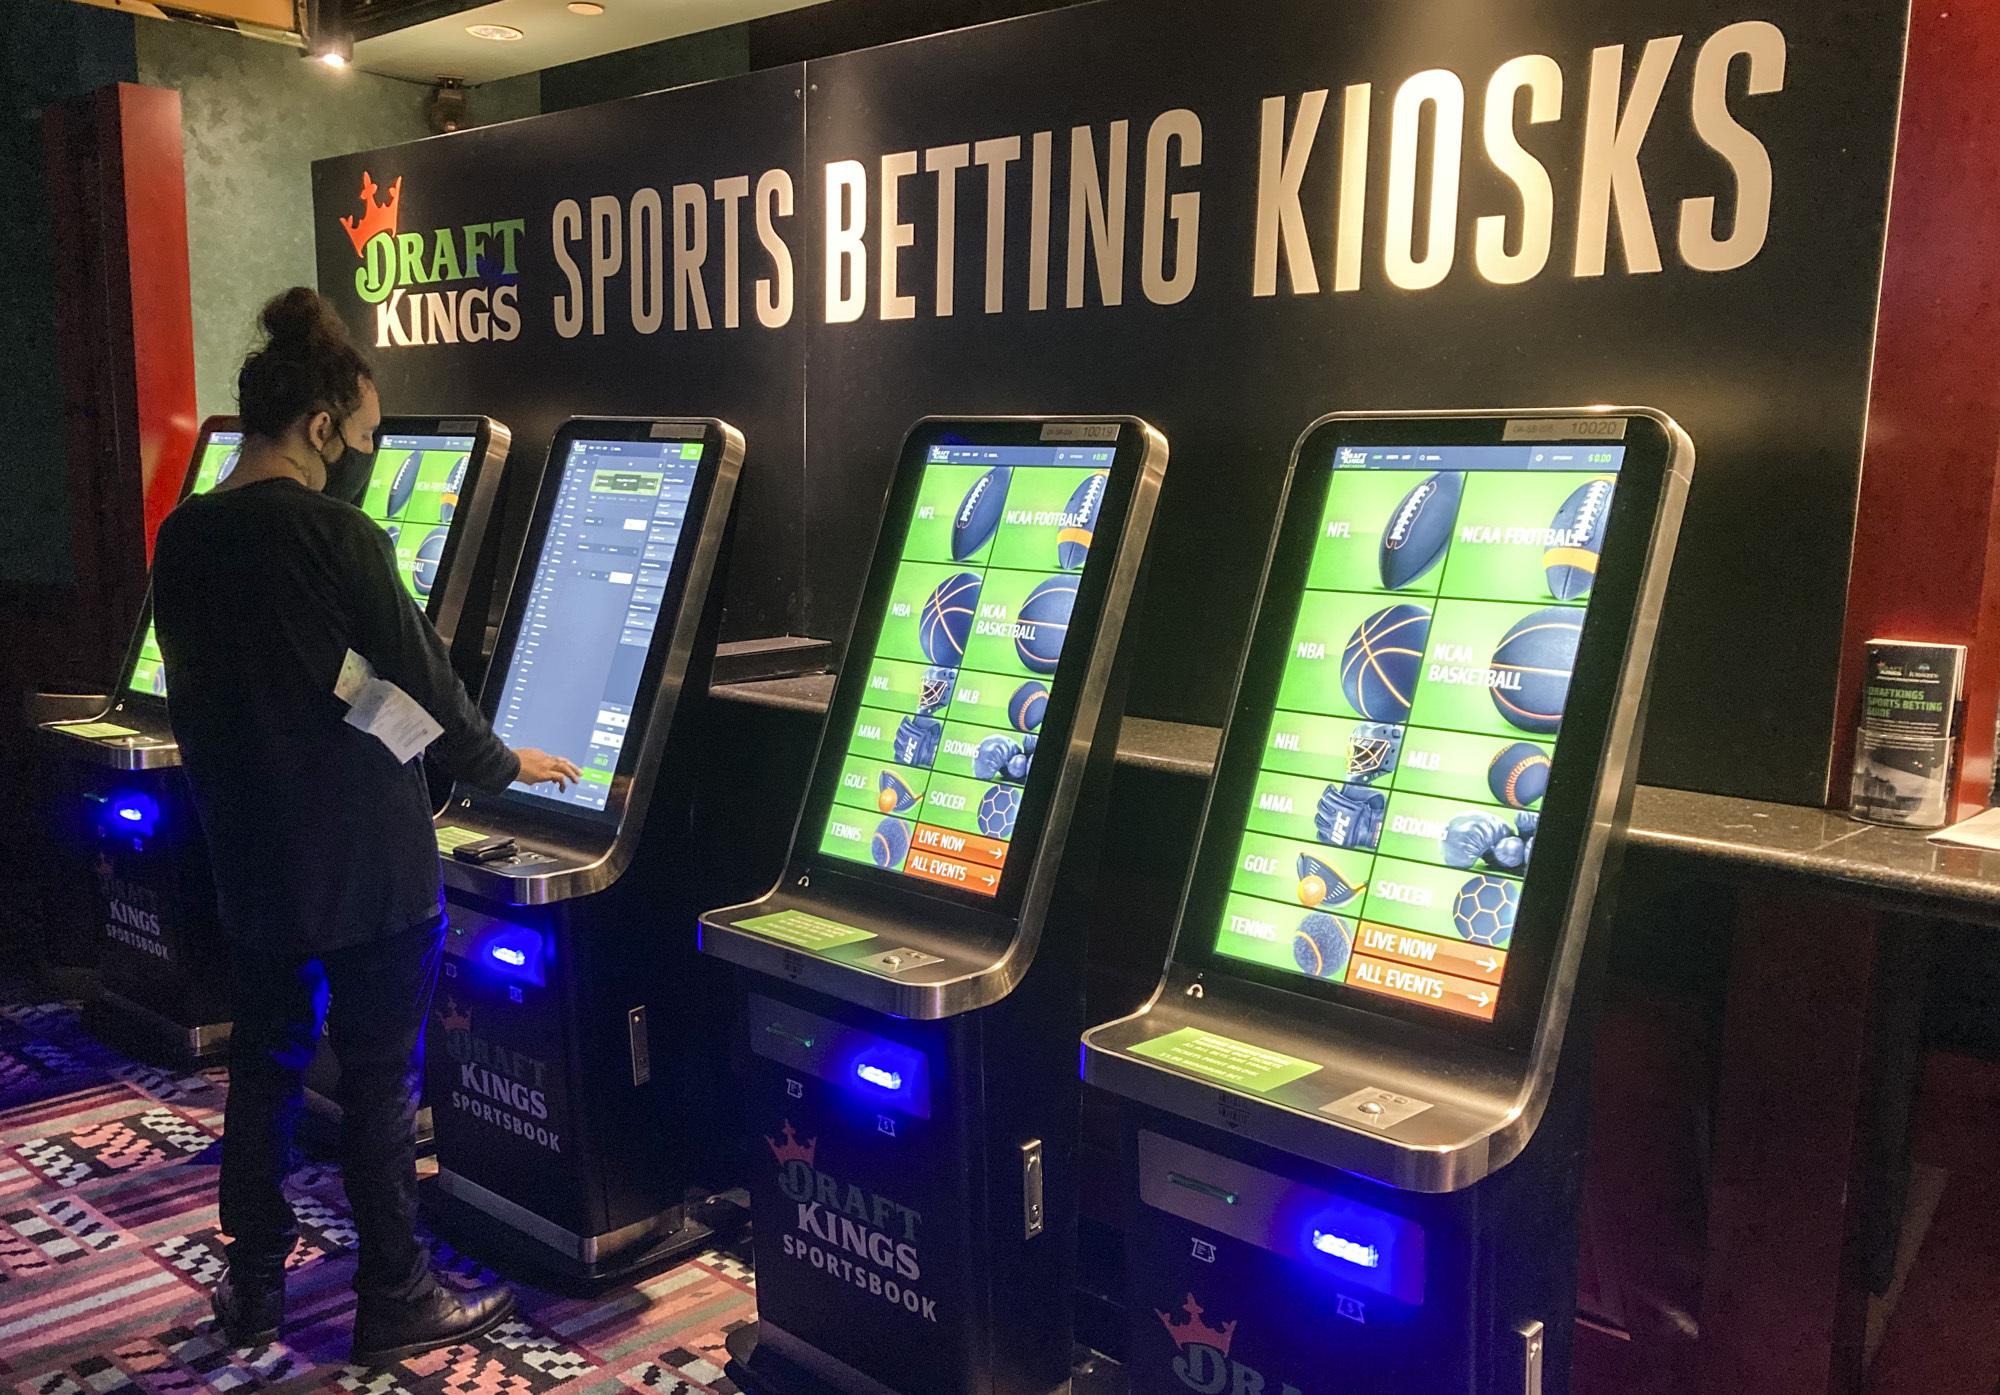 How To Turn asian bookies, asian bookmakers, online betting malaysia, asian betting sites, best asian bookmakers, asian sports bookmakers, sports betting malaysia, online sports betting malaysia, singapore online sportsbook Into Success